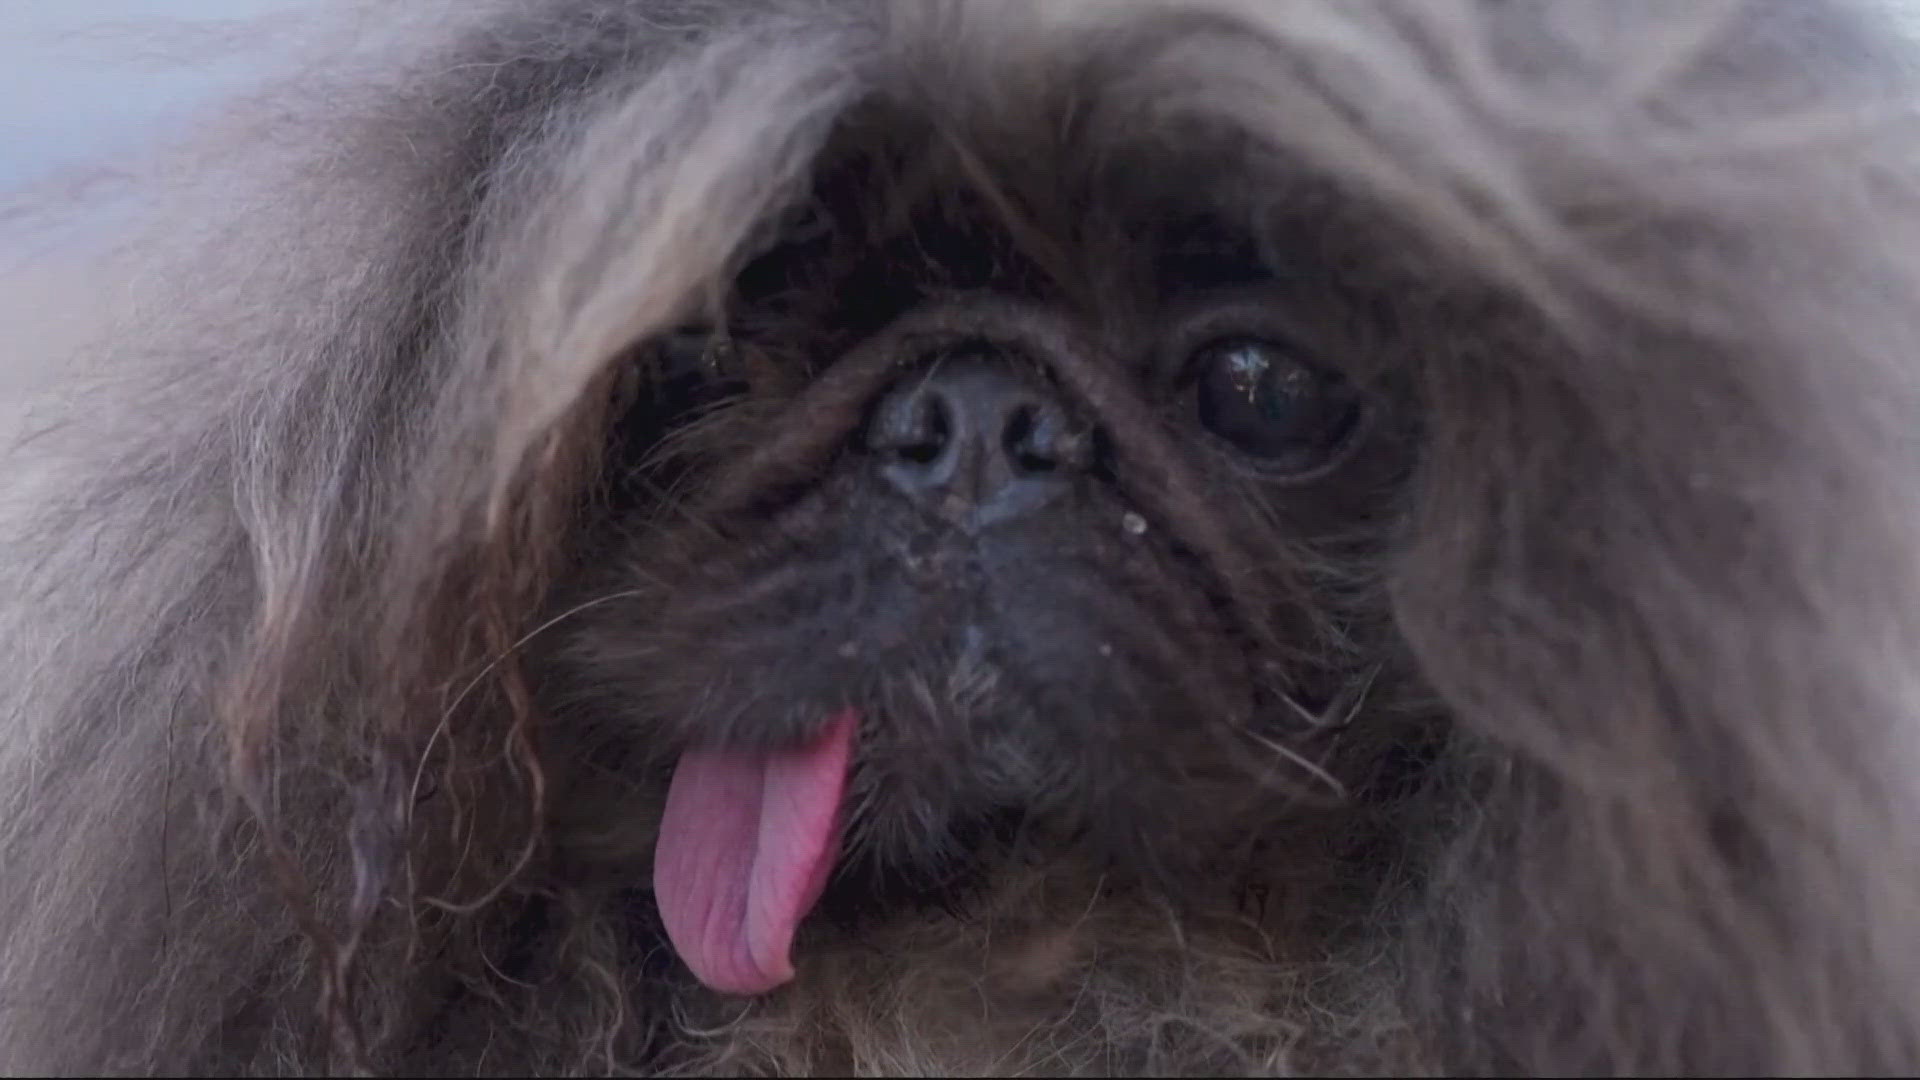 'Wild Thang' wins Worlds Ugliest Dog contest after placing second three years in a row